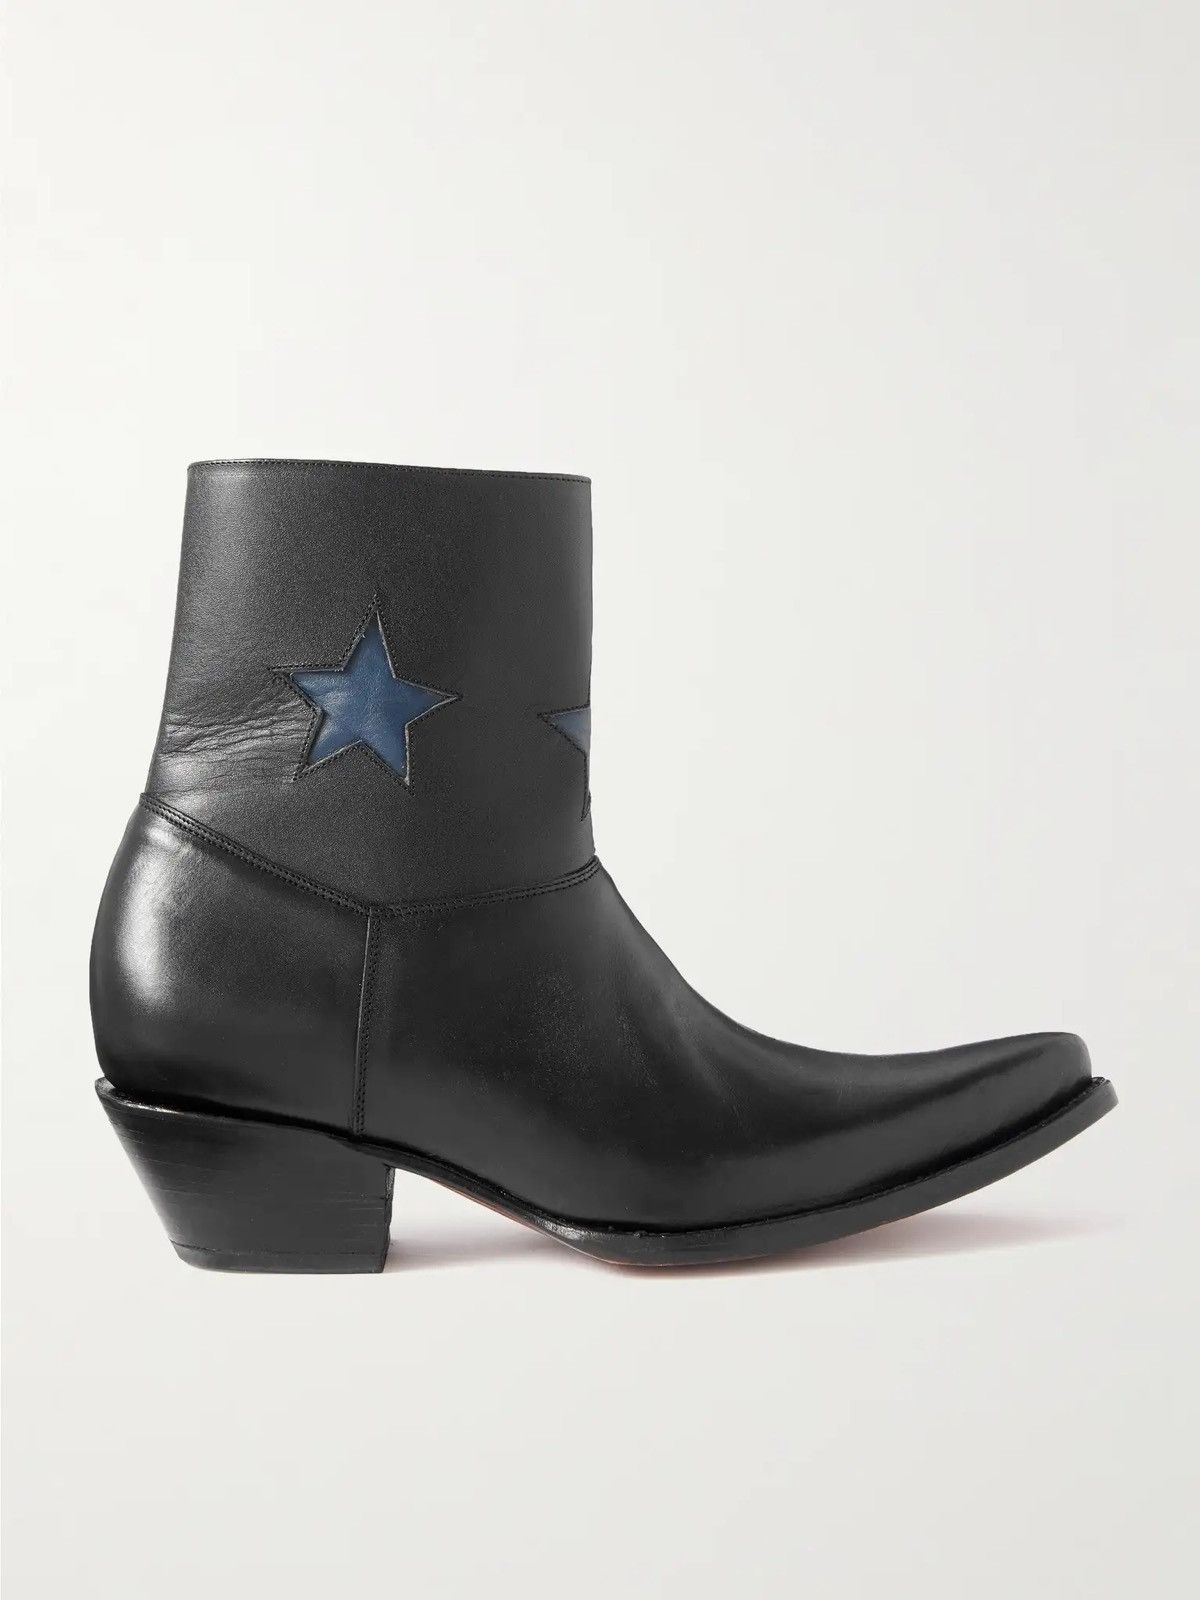 Pre-owned Enfants Riches Deprimes $3.3k Valueleather Western Star Boots In Black